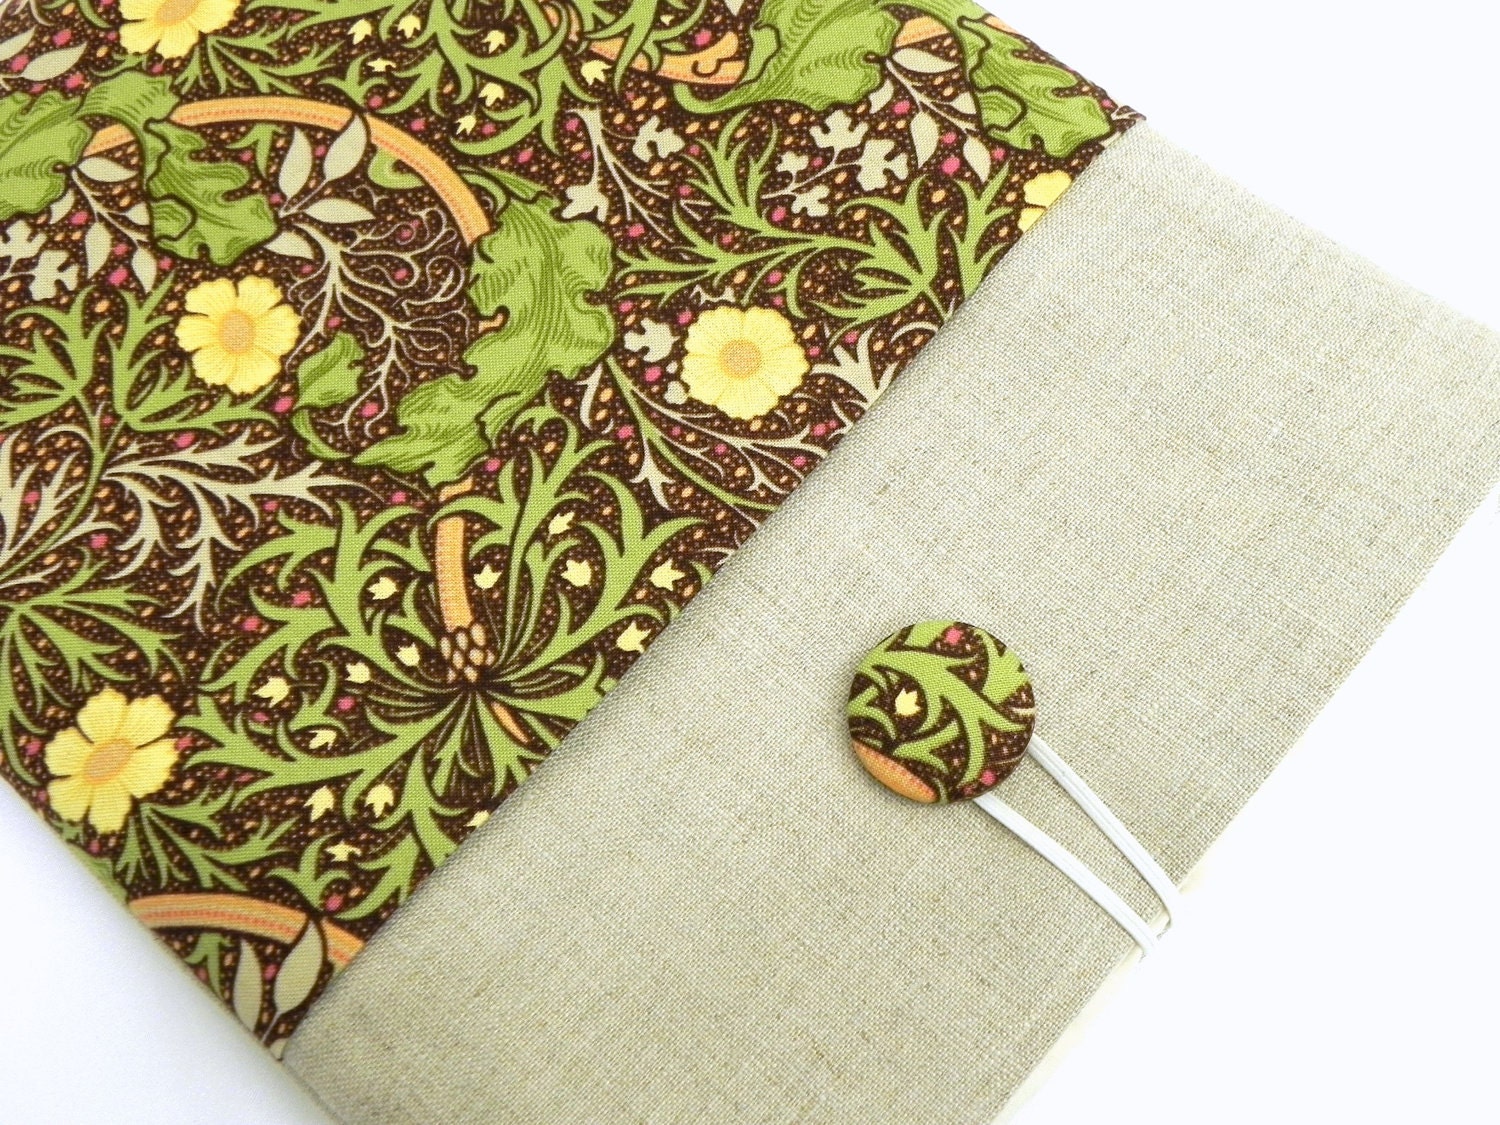 iPad Cover Case, iPad Padded Sleeve - Floral fabric in brown, yellow, peach and green  - Linen - GaranceCouture